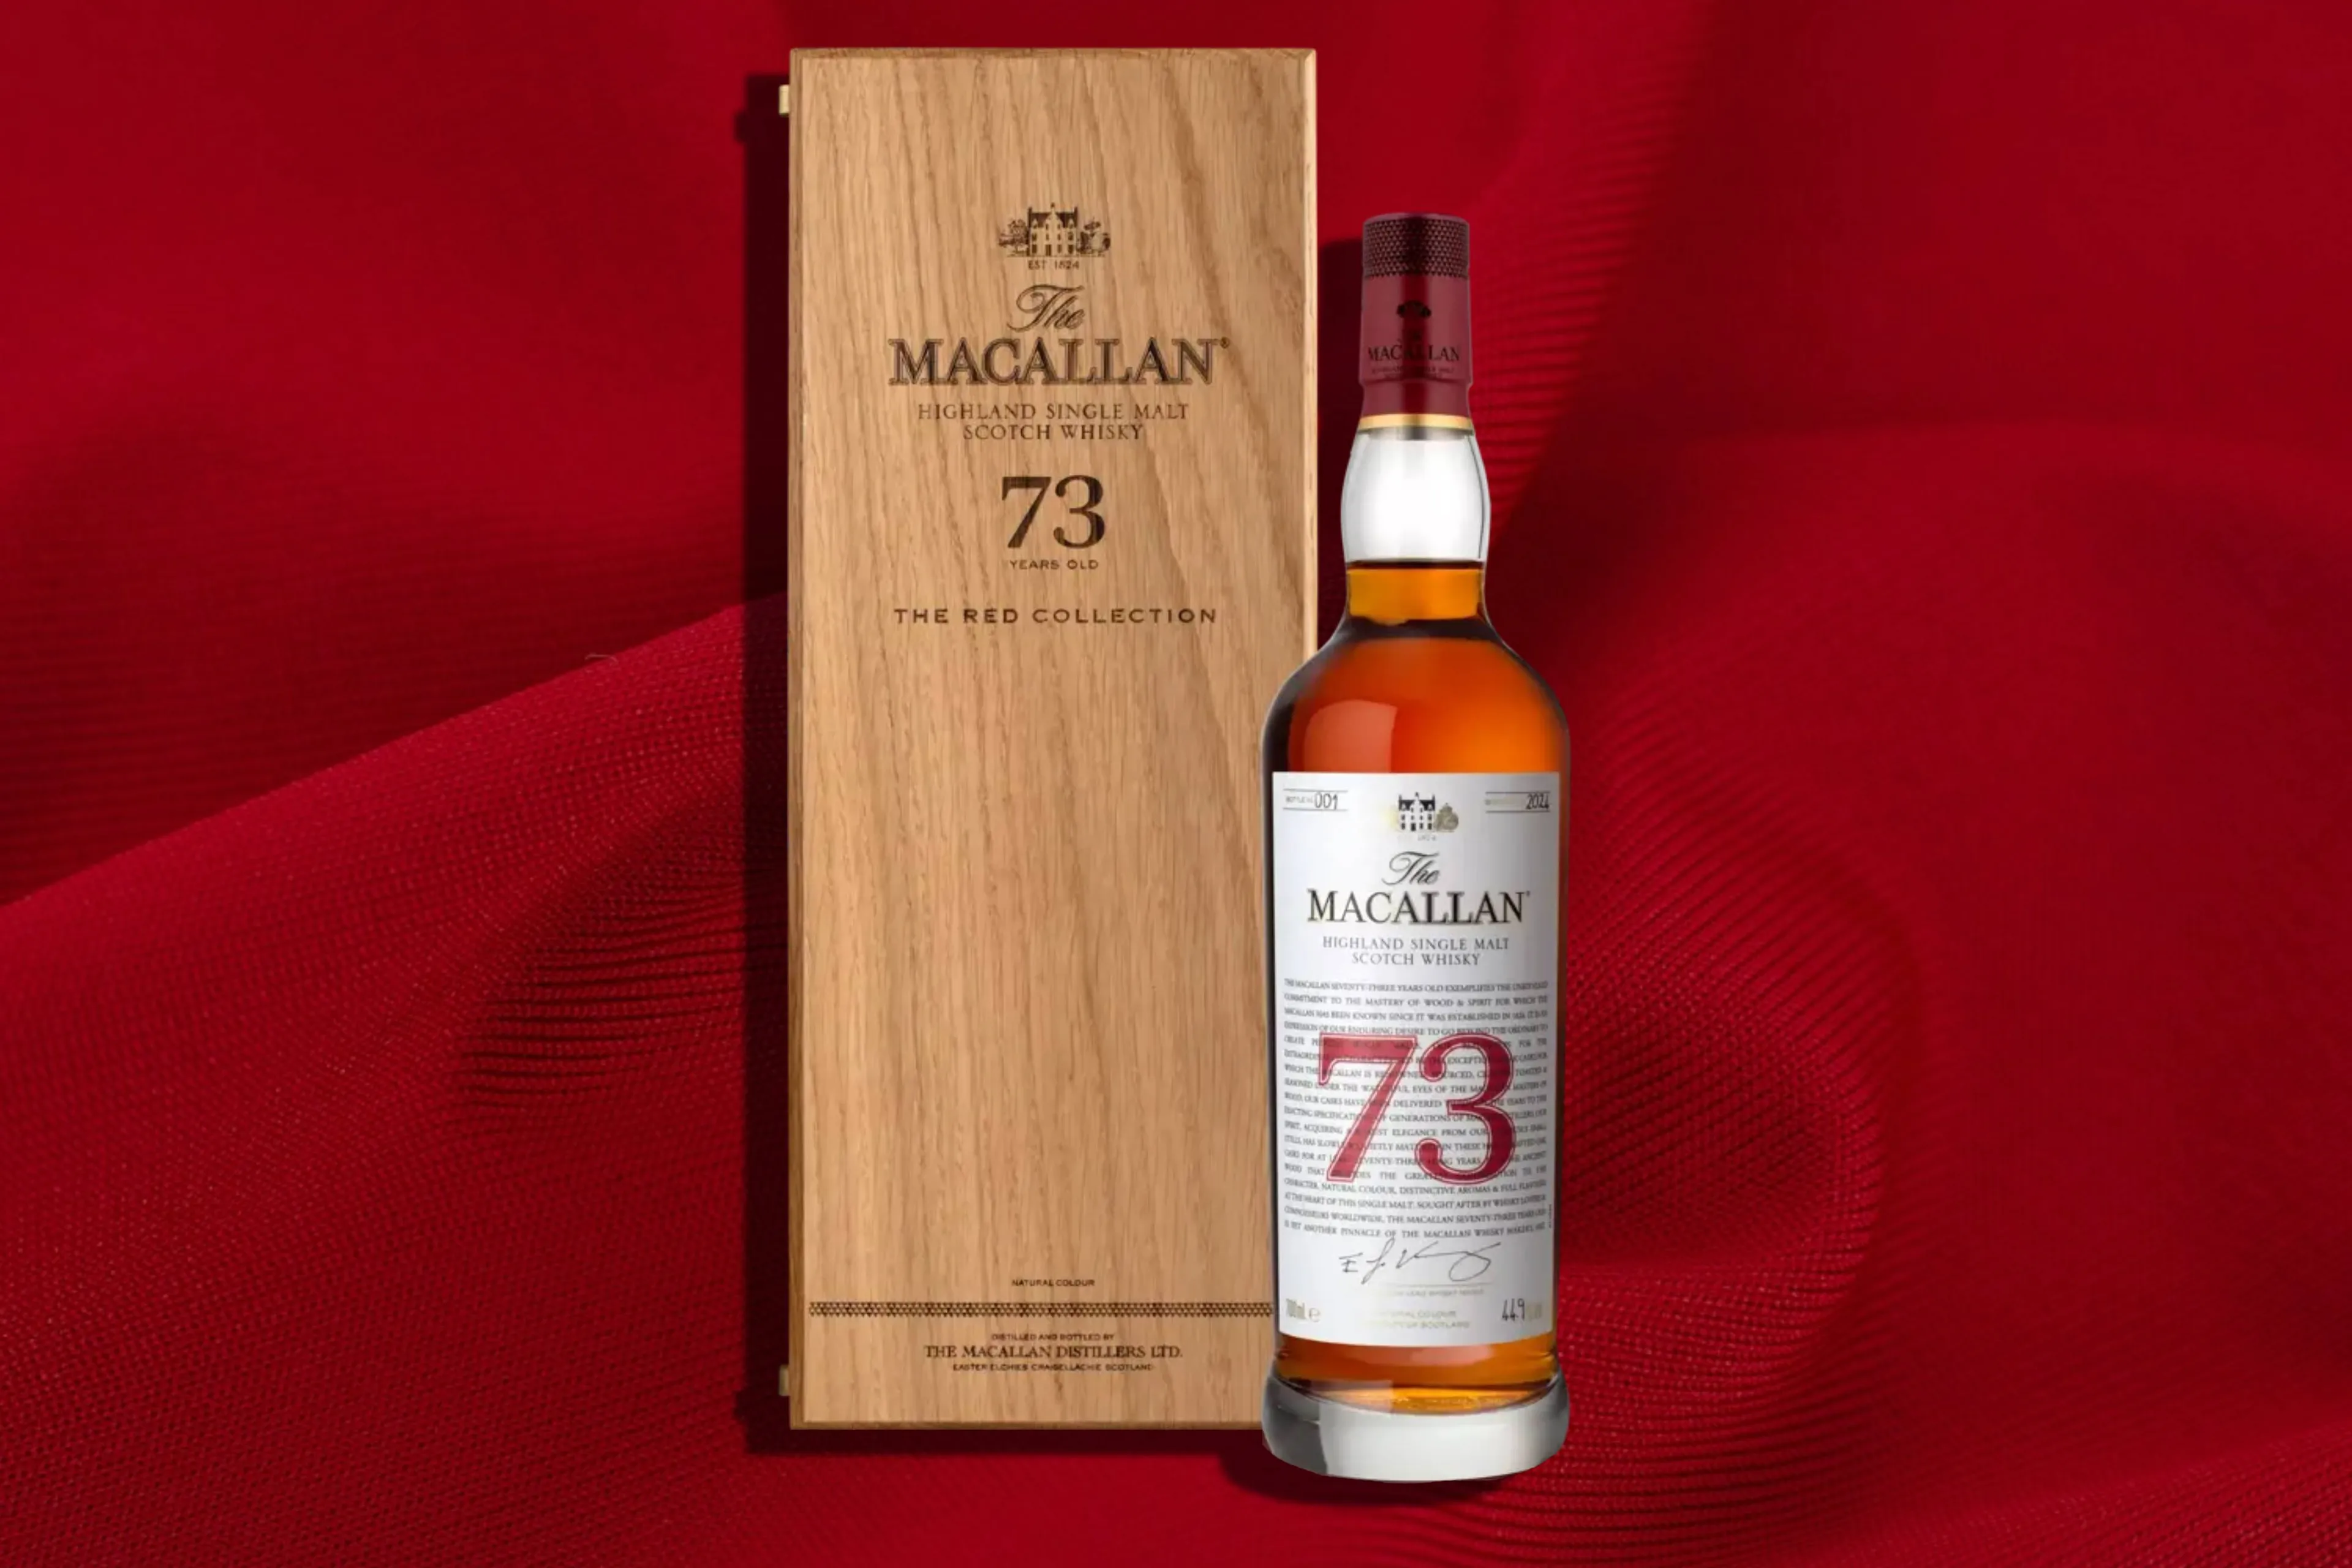 the macallan red collection 73 years old whisky